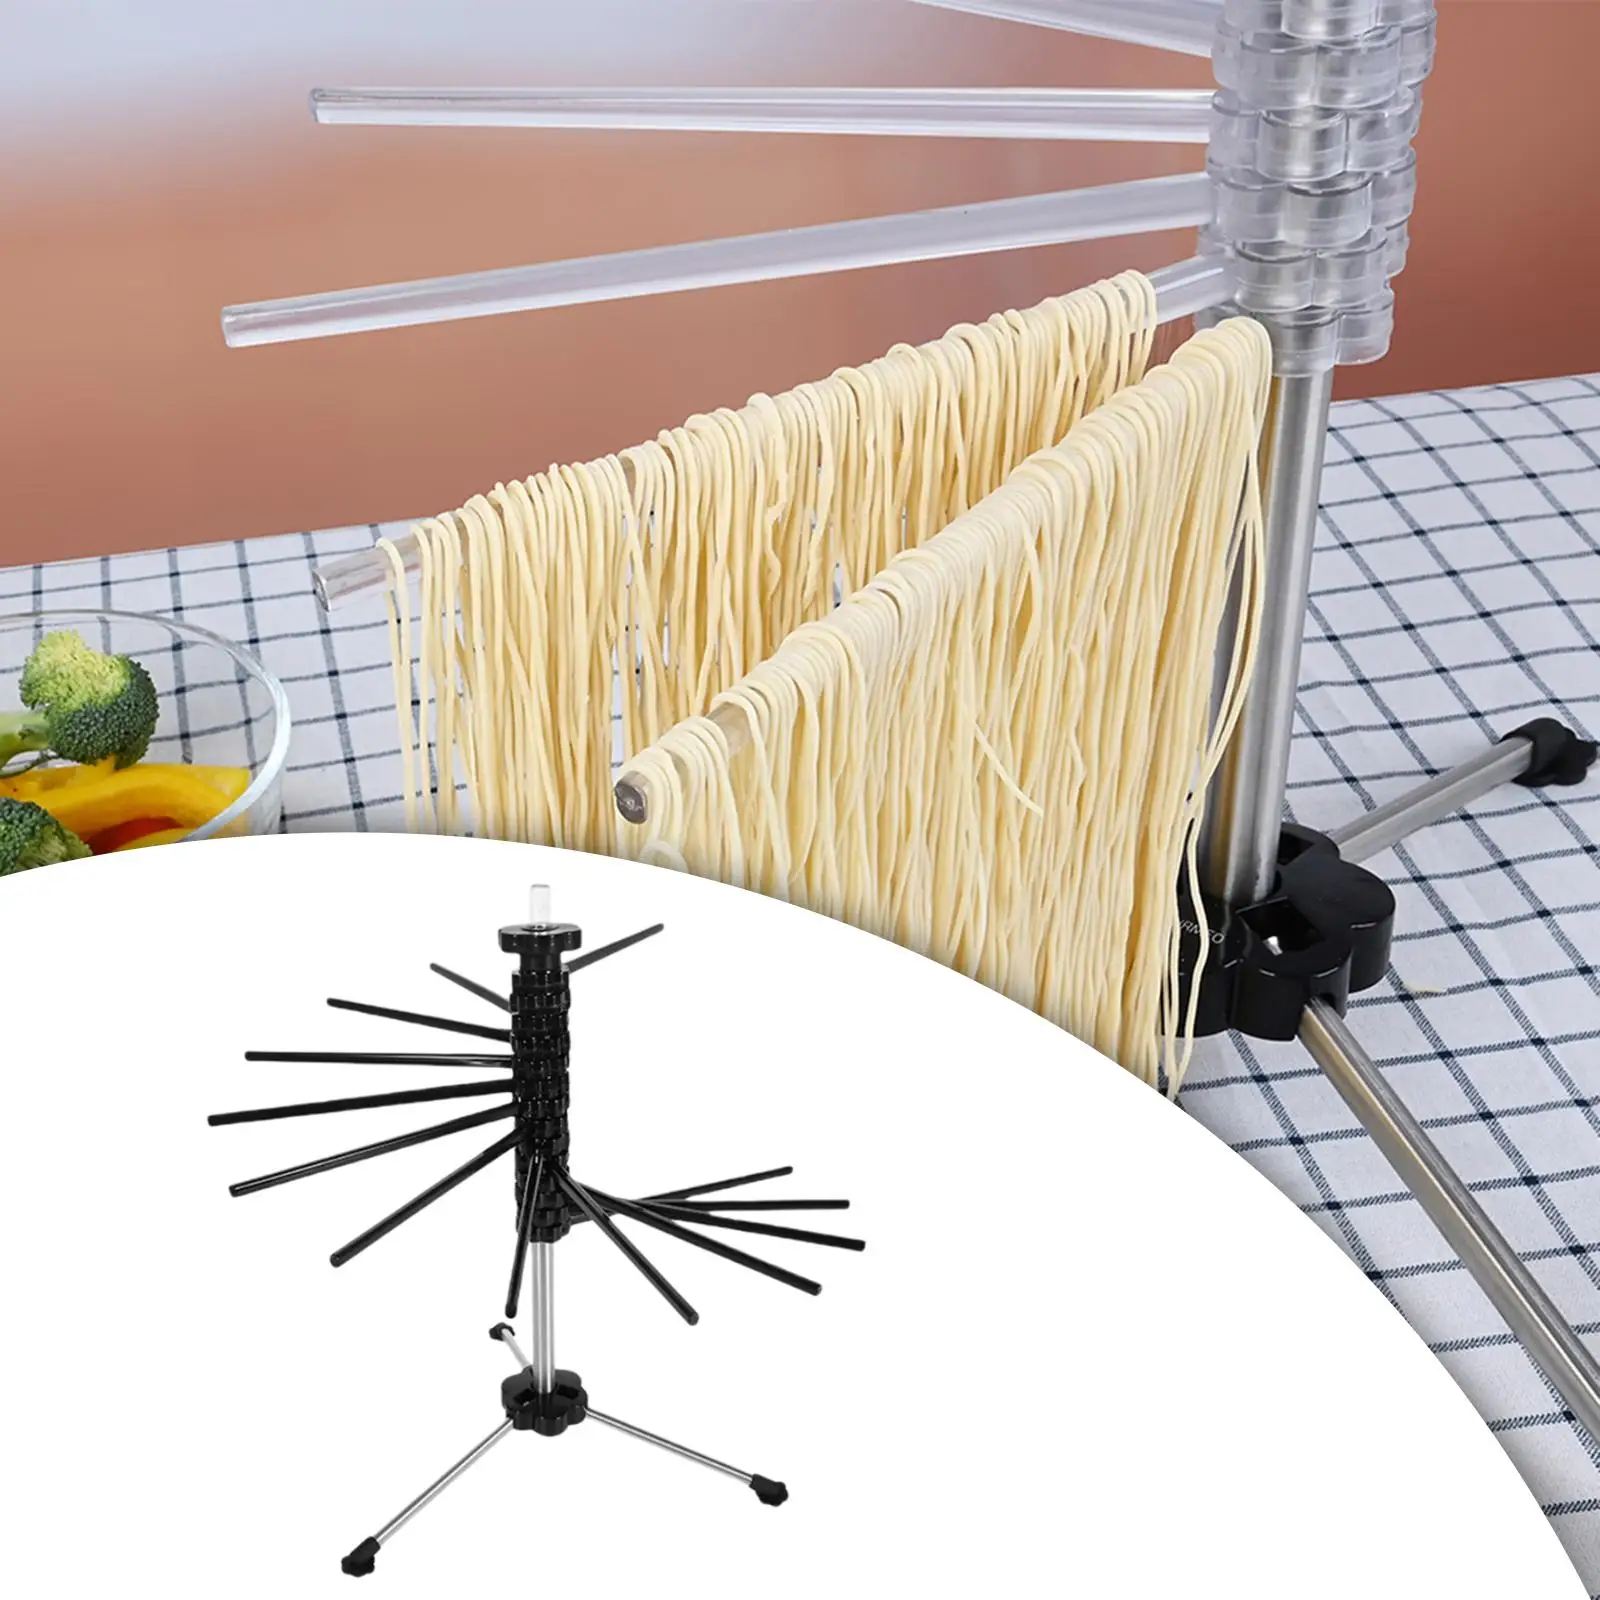 Collapsible Pasta Drying Rack With 14 Collapsible Rods For Fresh Pasta -  Pasta Tools - AliExpress